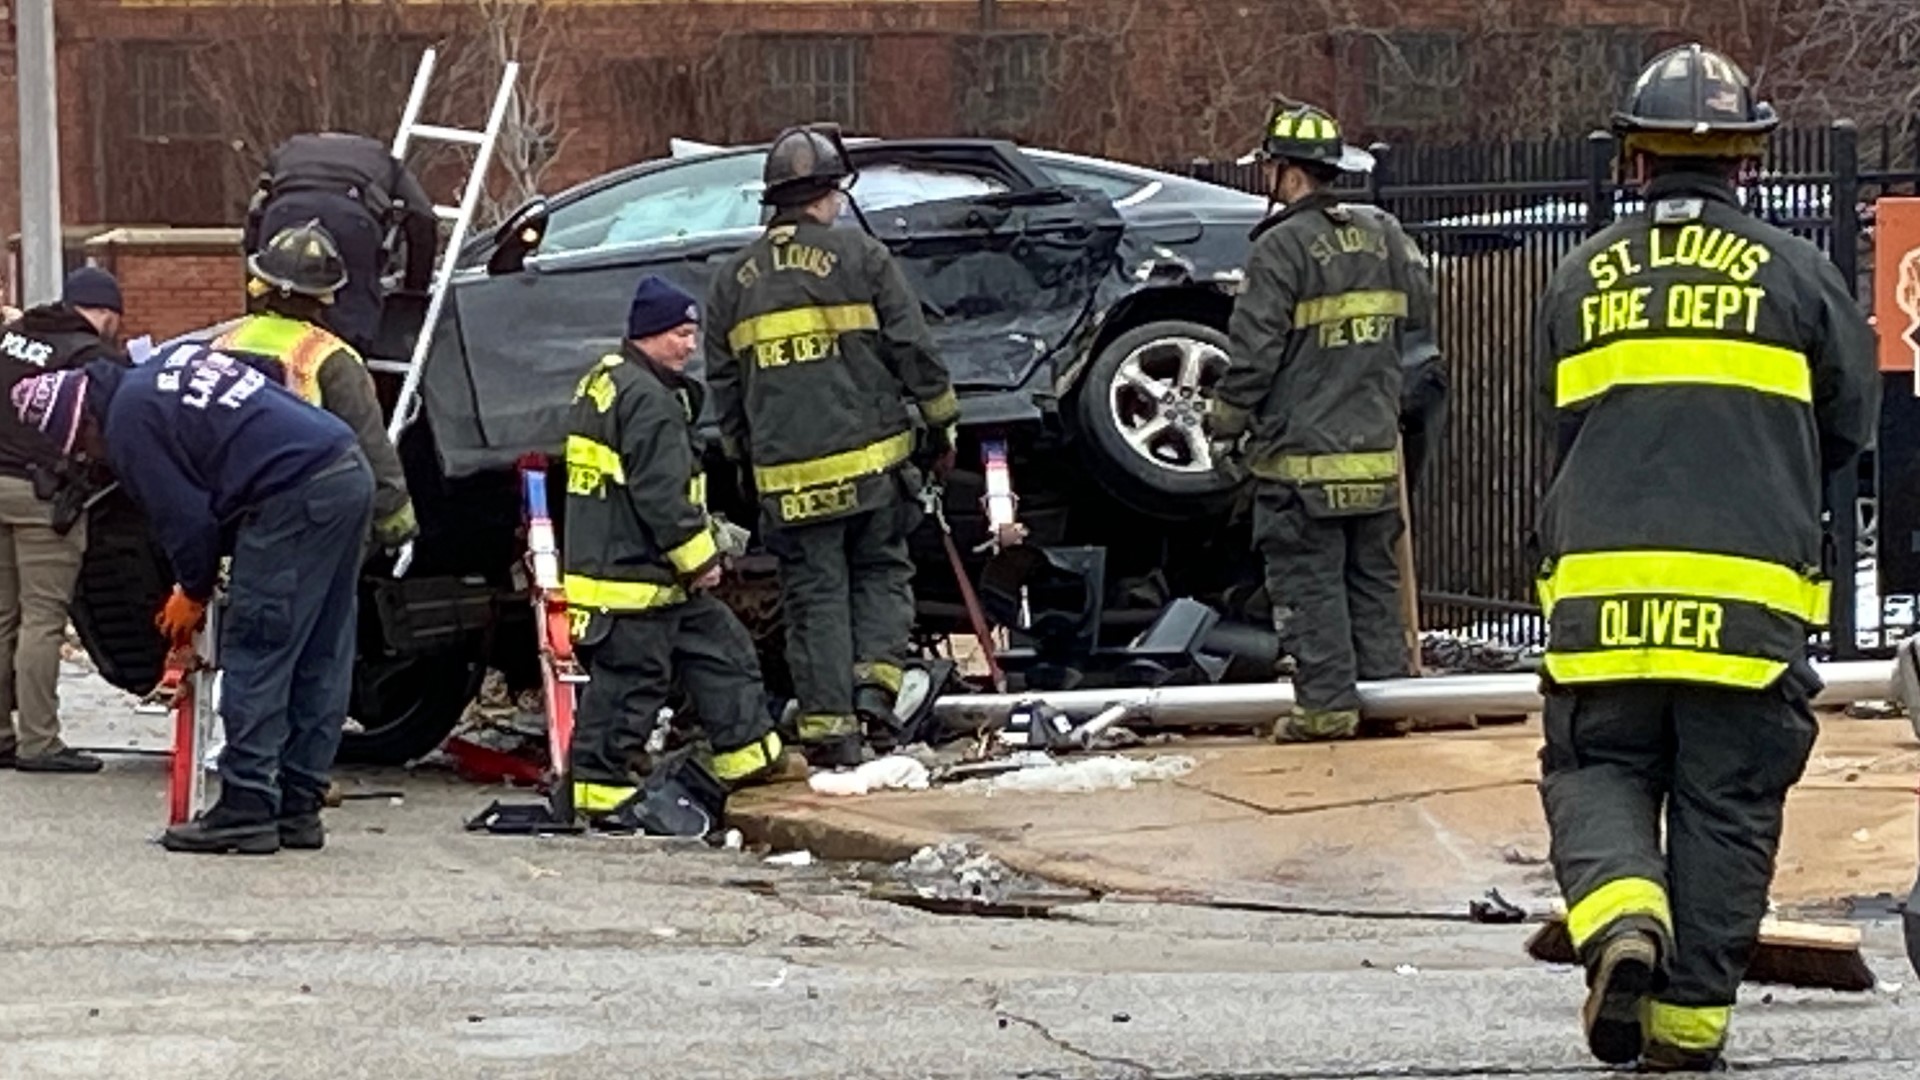 St. Louis police Major Janice Bockstruck briefed the media on a Wednesday afternoon crash involving two vehicles that were reported as carjacked.